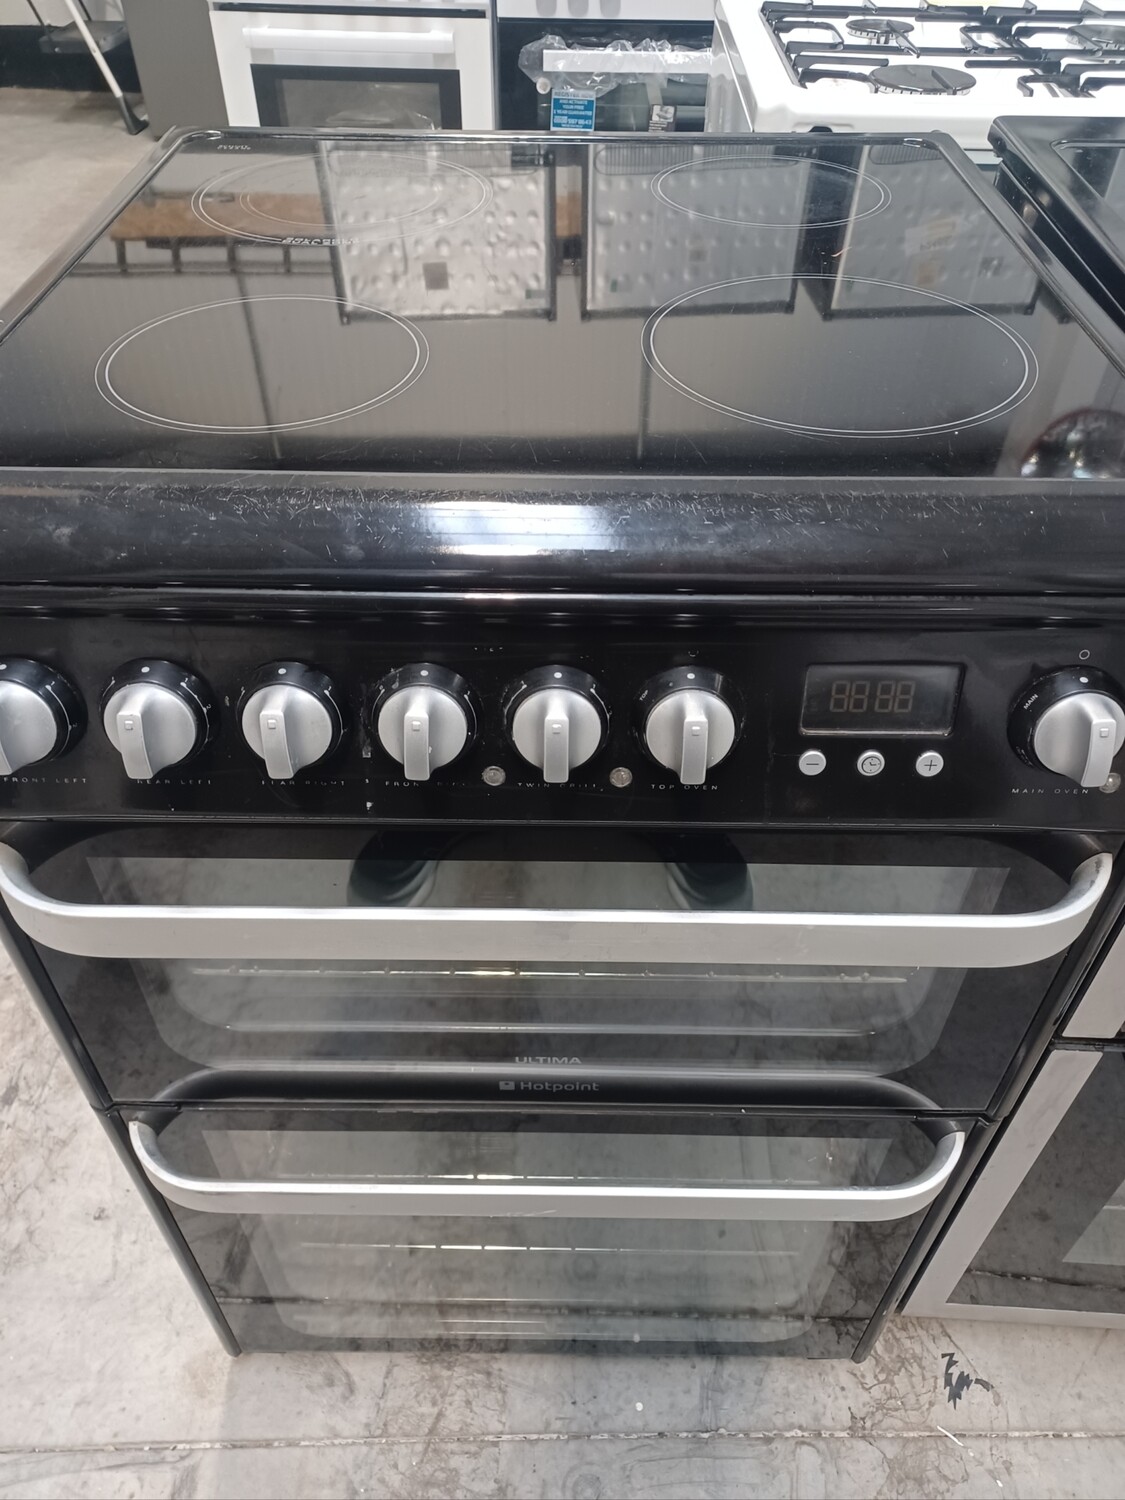 Hotpoint 60cm Double Oven Cooker Ceramic Hobs - Black - Refurbished + 6 Month Guarantee 